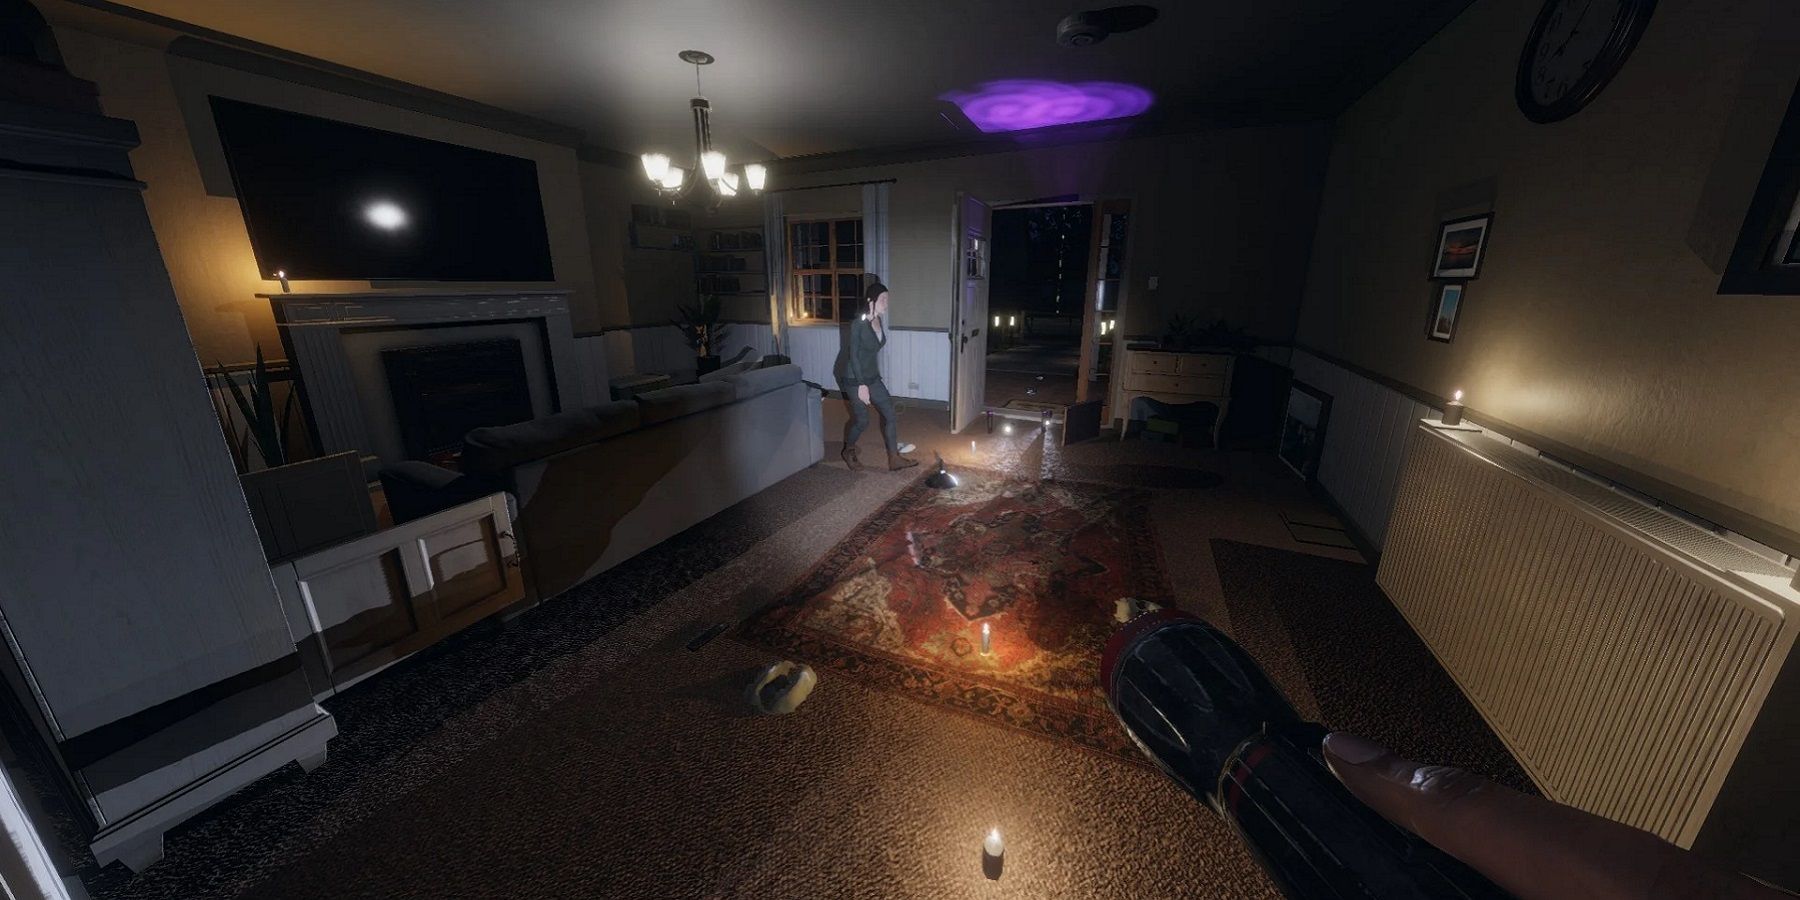 A screenshot from Phasmophobia showing two players investigating the living room in Willow Street house.